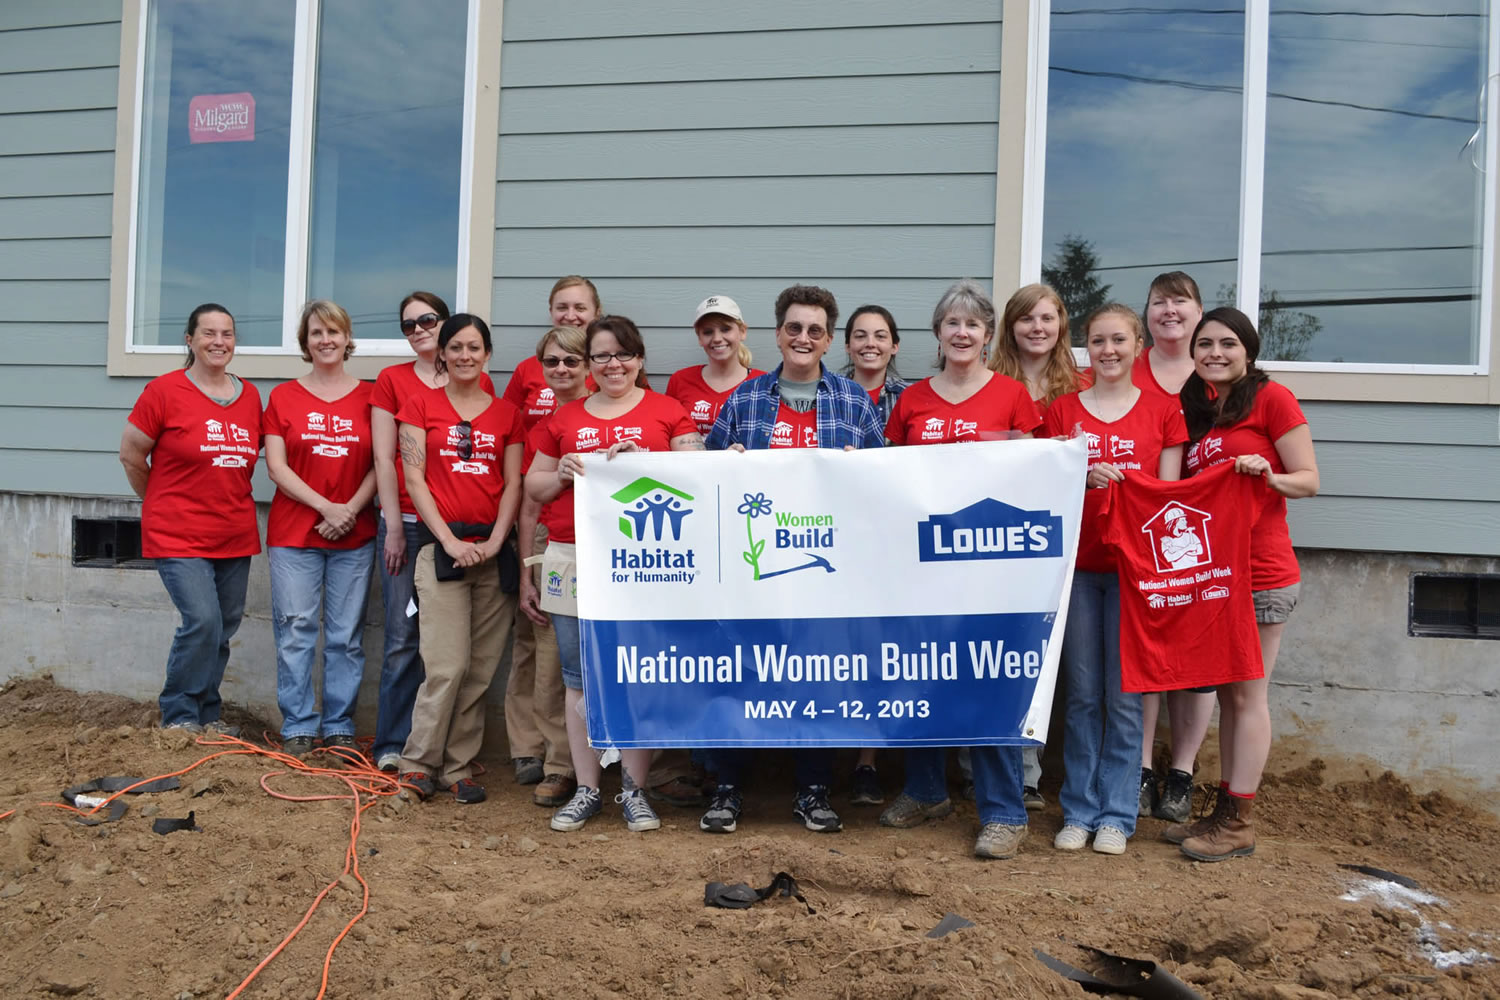 Shumway: Volunteers from Evergreen Habitat for Humanity take part in National Women Build Week, held May 4-12.